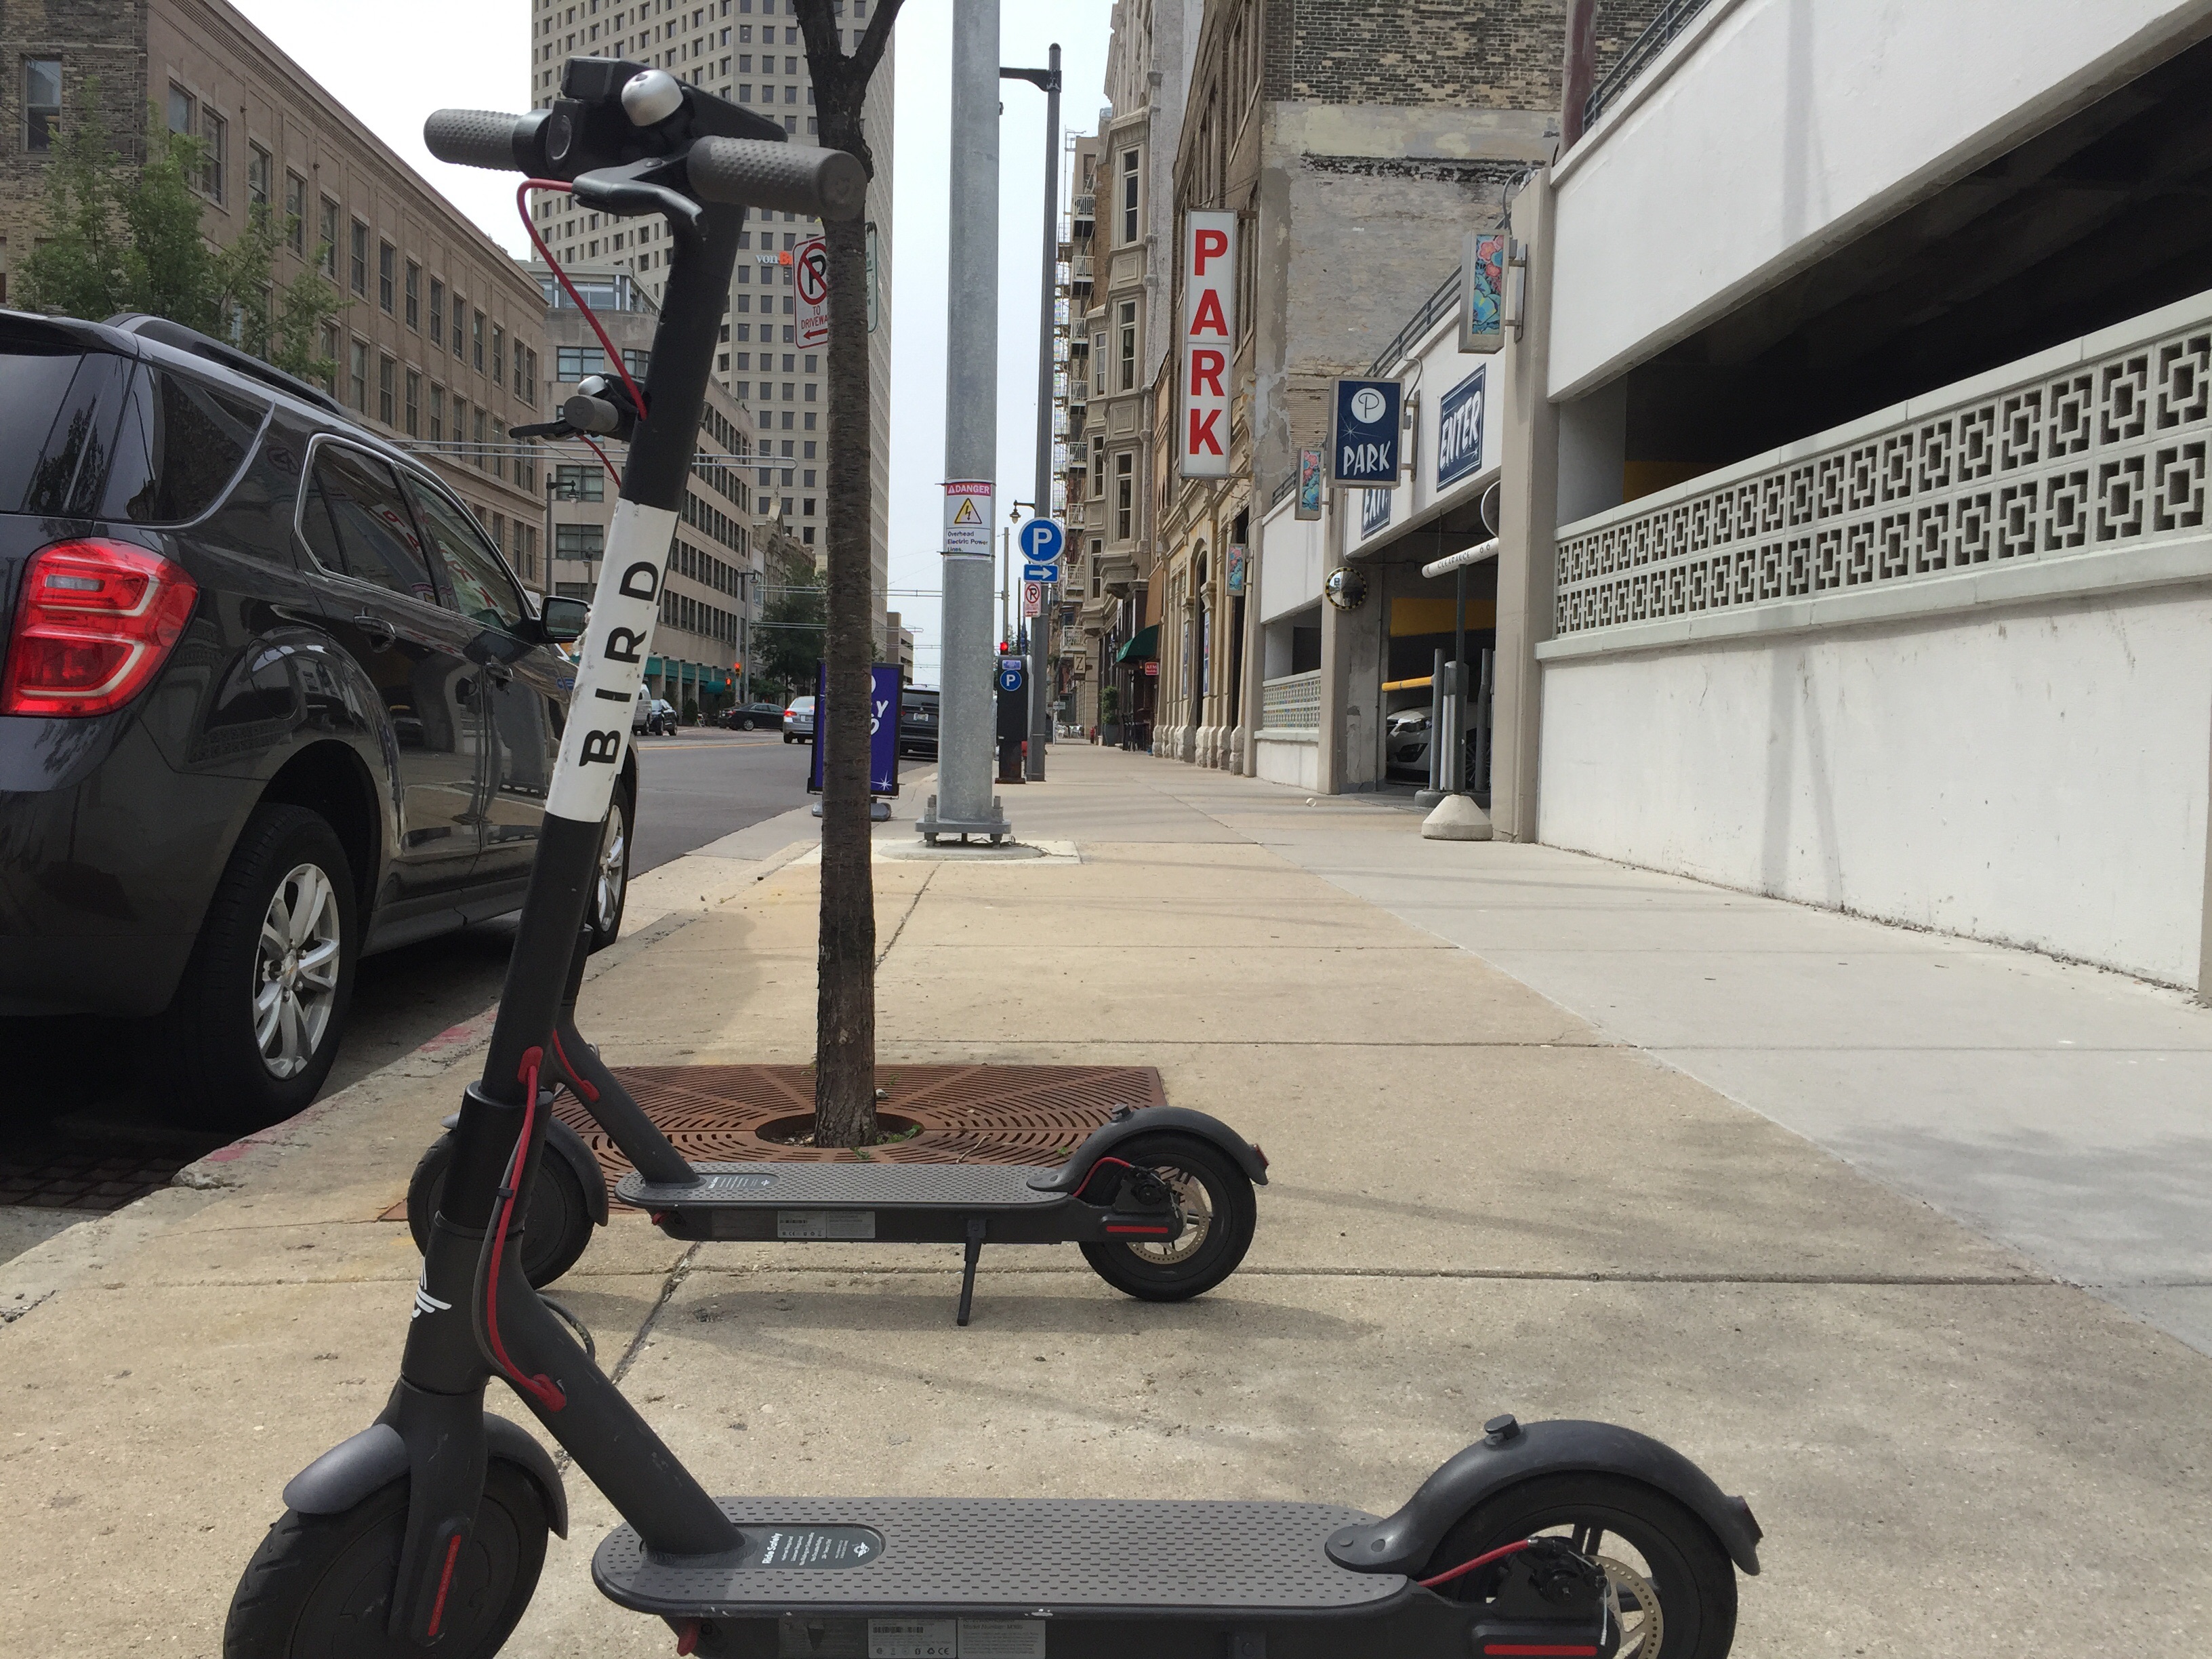 Electric Scooters in Wauwatosa, Starting Week of March 29